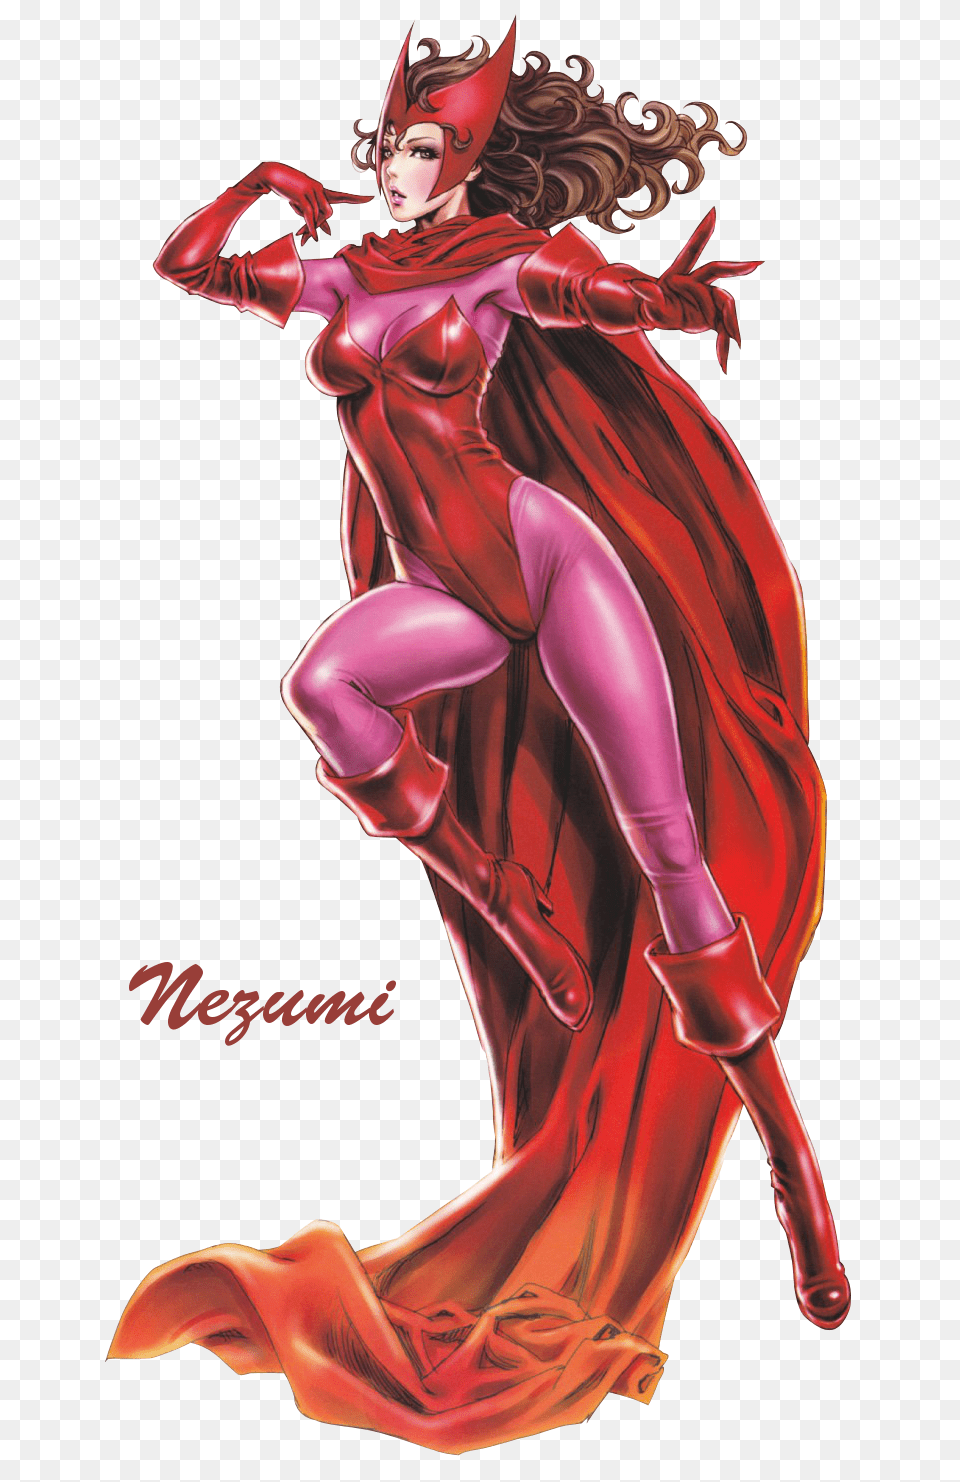 Download Hd Scarlet Witch Marvel Bishoujo Scarlet Witch Scarlet Witch Comics Iphone, Book, Publication, Adult, Person Free Transparent Png